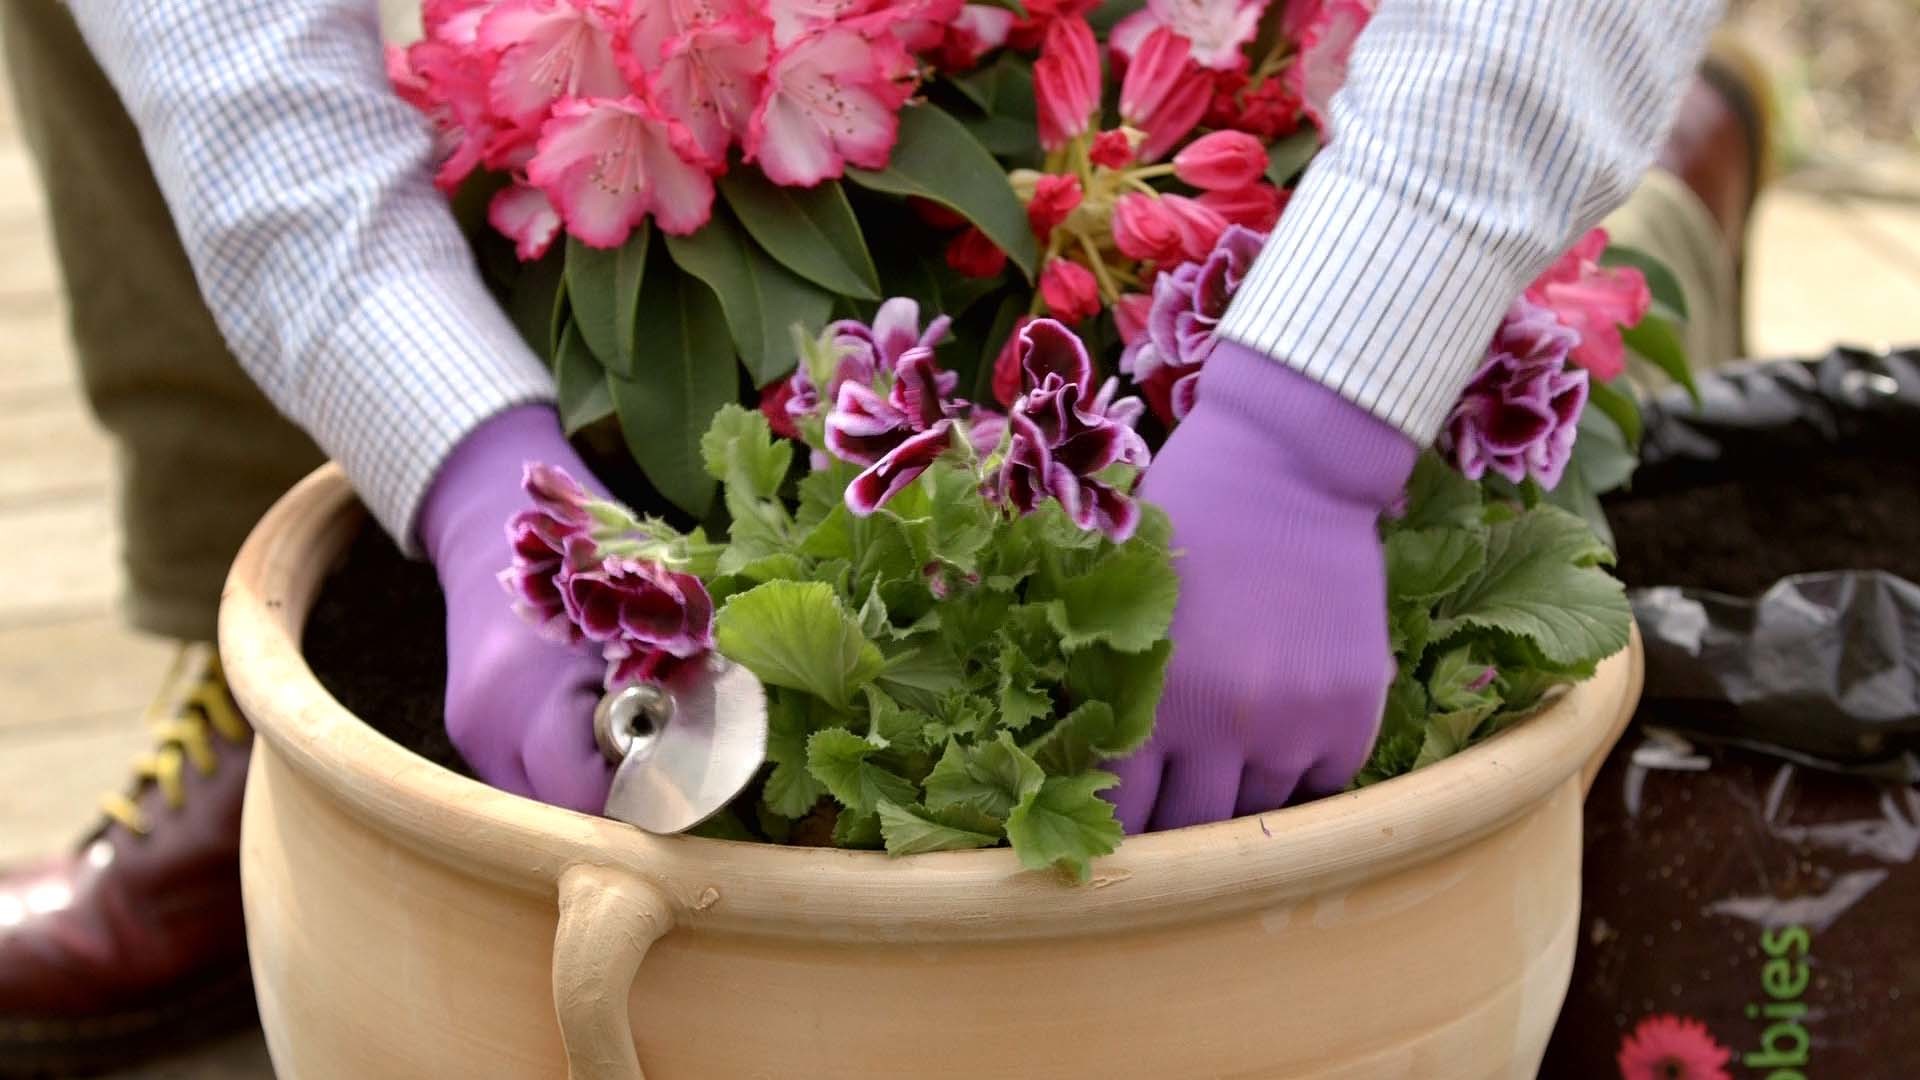 Hands planting plant in plant pot